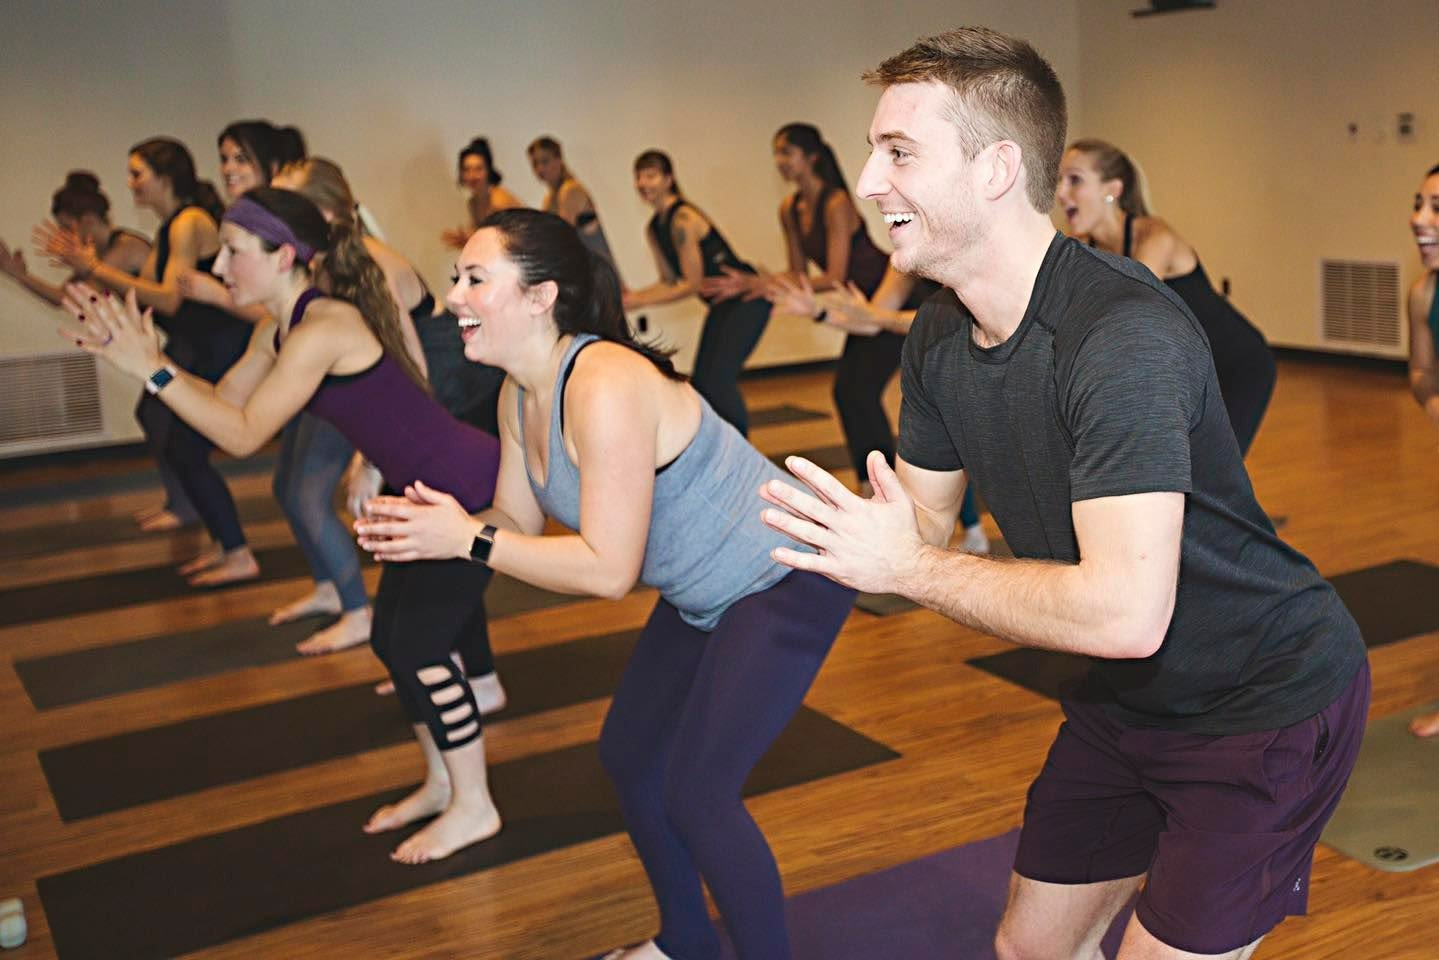 Power Life Yoga Barre Fitness - Town Center: Read Reviews and Book